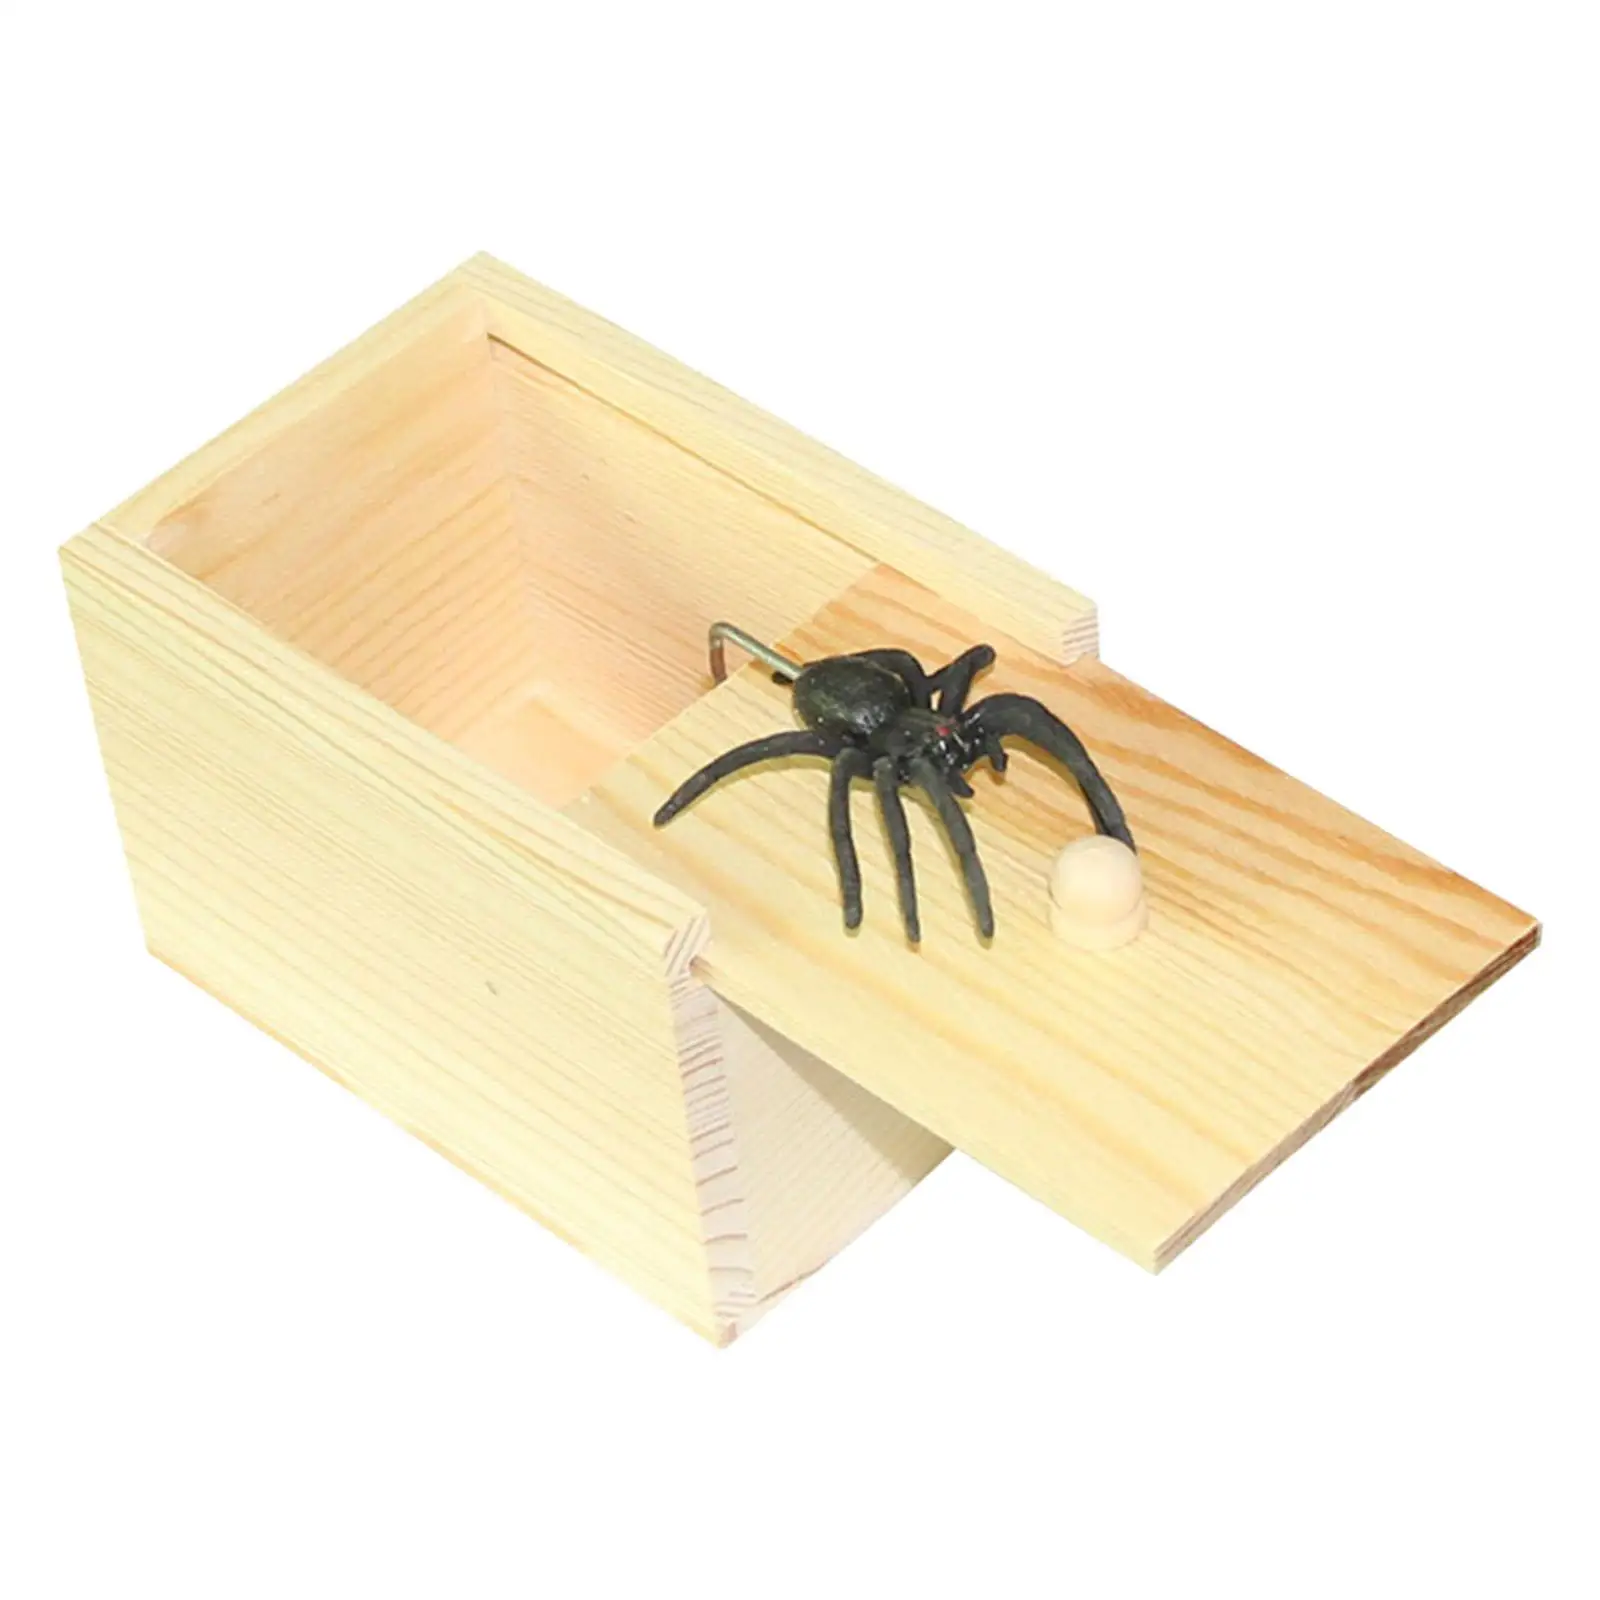 Spider prank case Tricky Toy Handmade Fun Practical Joke Boxes for Halloween Gifts